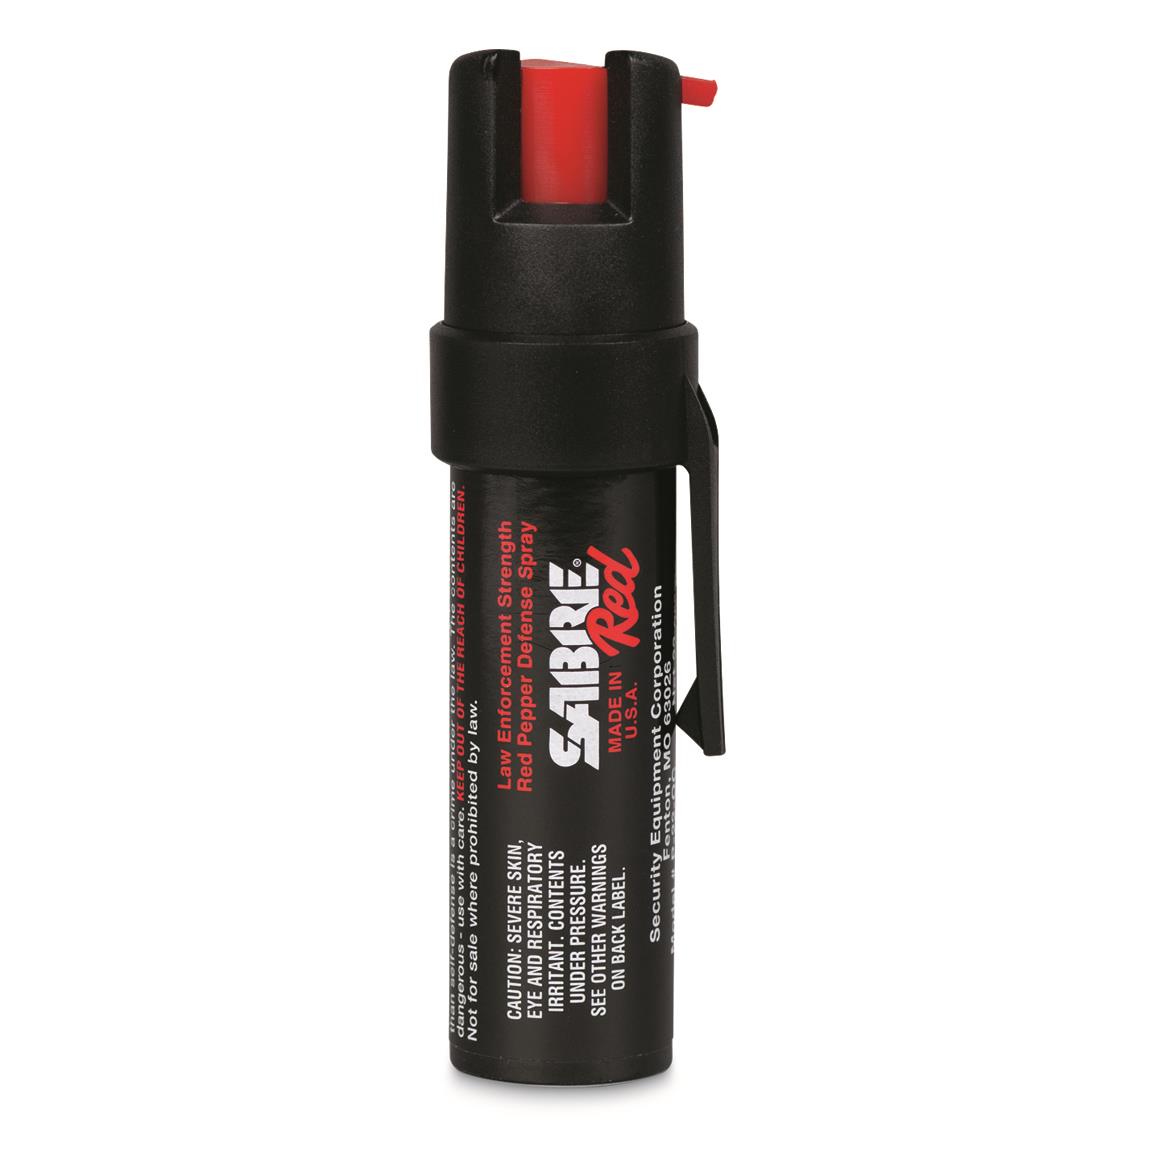 Sabre Pepper Spray with Attachment Clip, 2 Pack